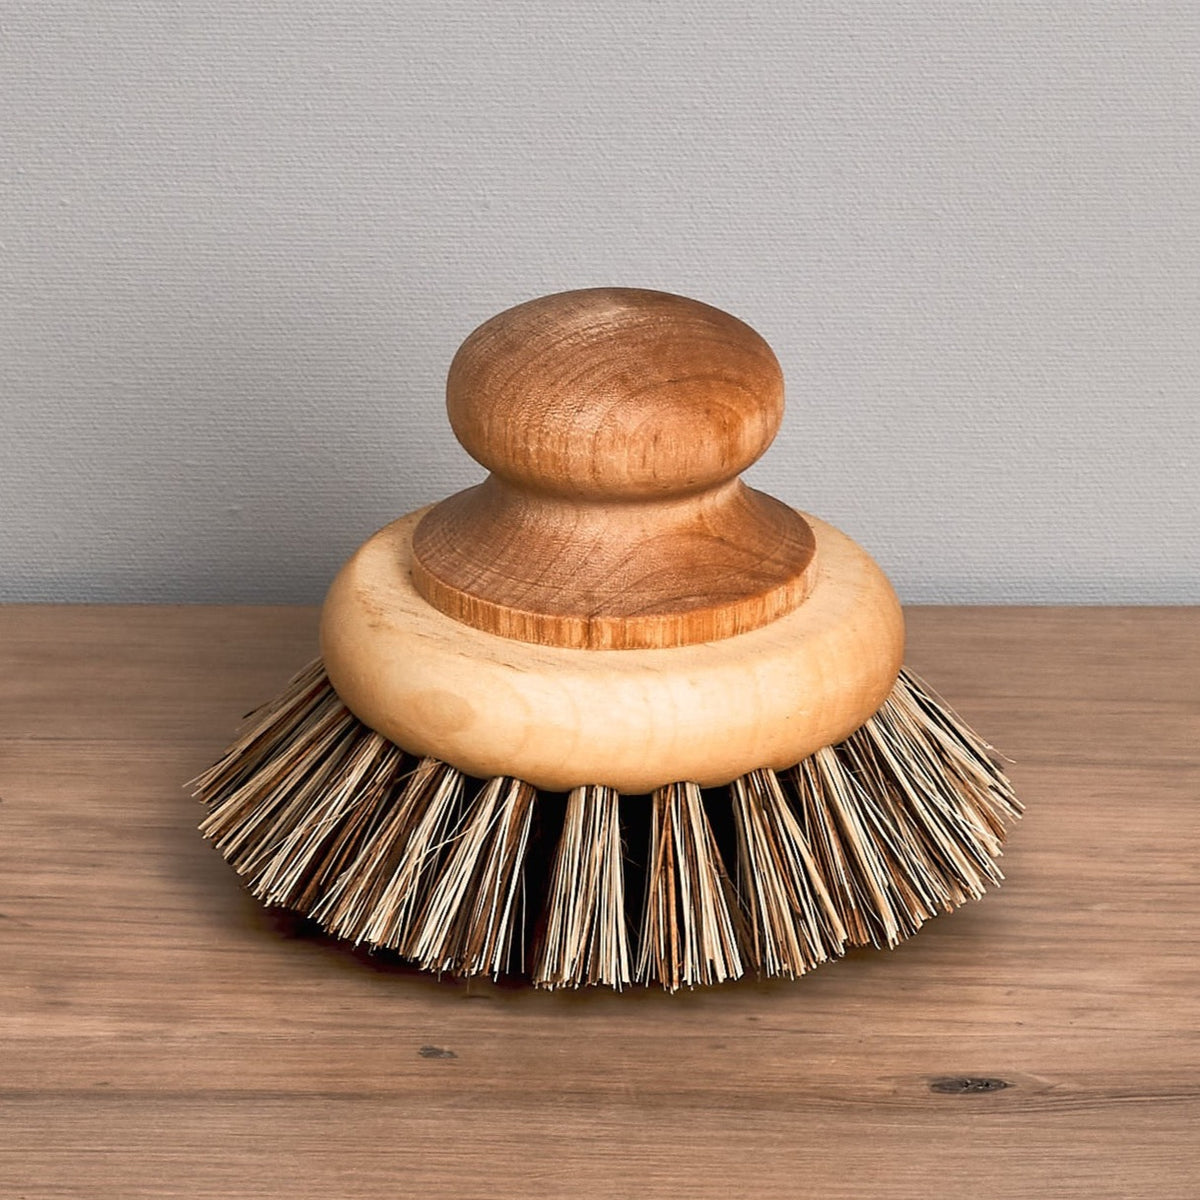 A Pot &amp; Pan Brush from Iris Hantverk sits on top of a wooden table.